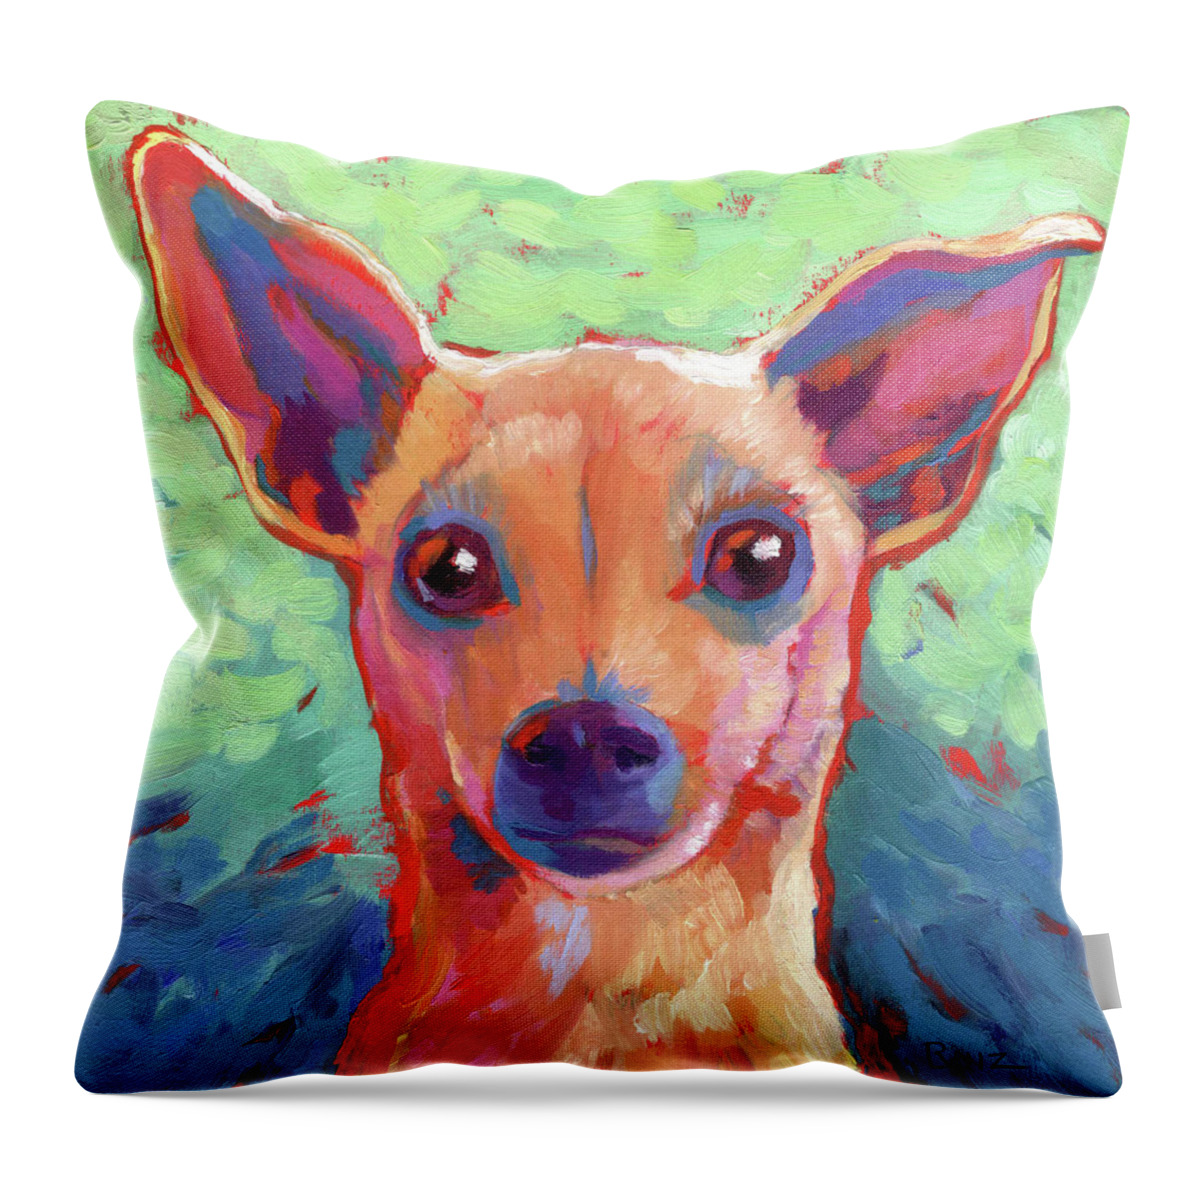 Dog Throw Pillow featuring the painting Twyla Chihuahua by Linda Ruiz-Lozito